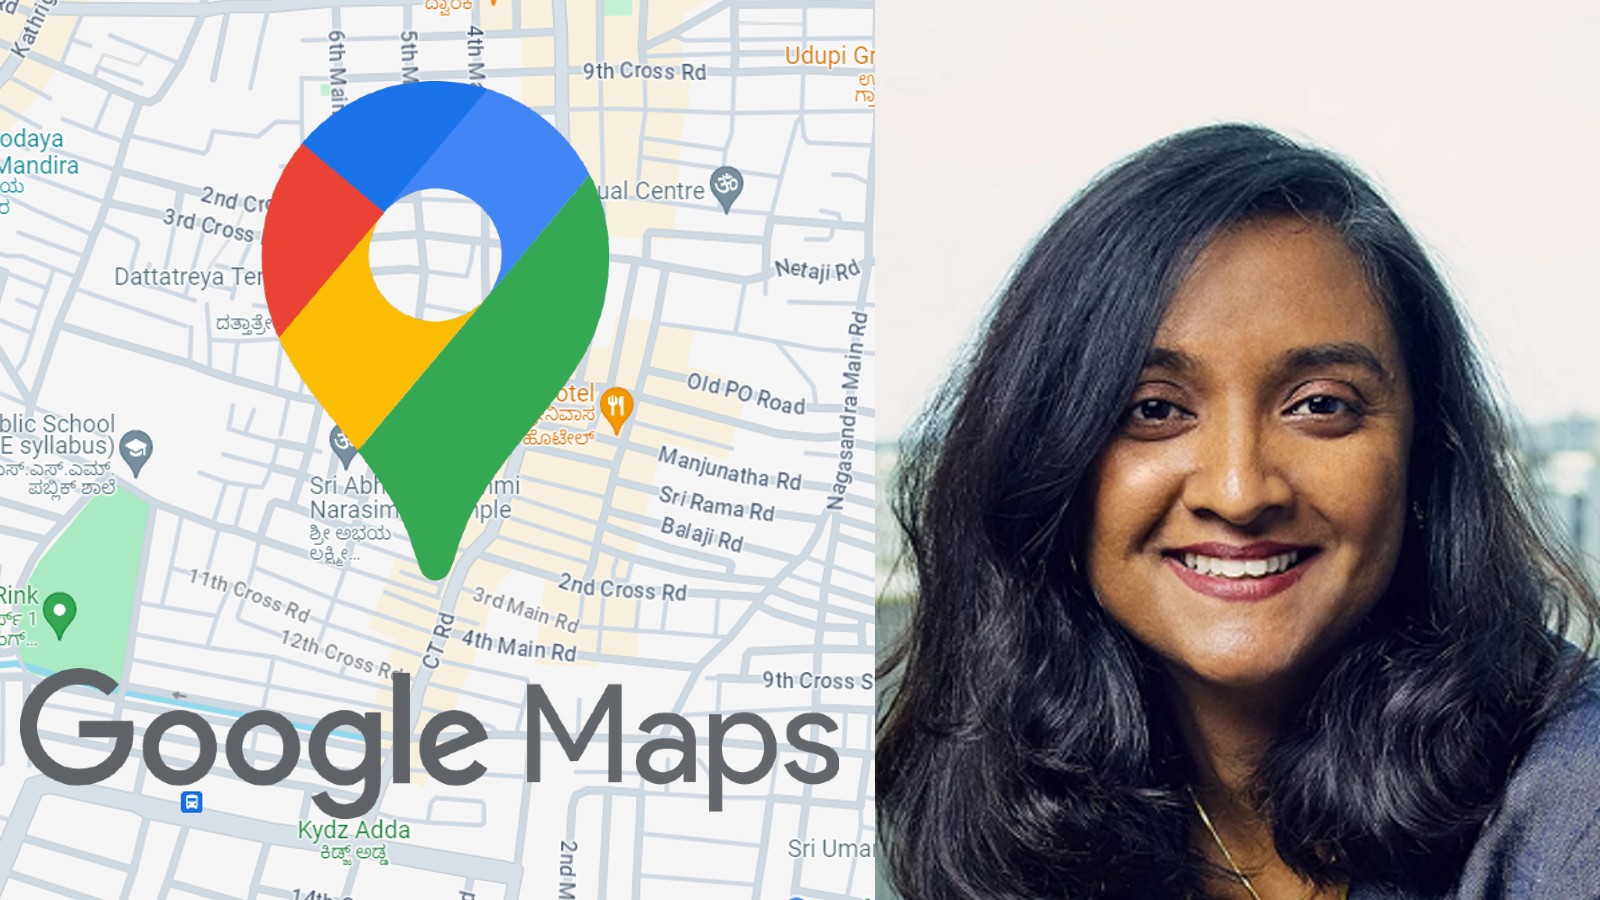 Google Maps is changing to offer Indian users the visual